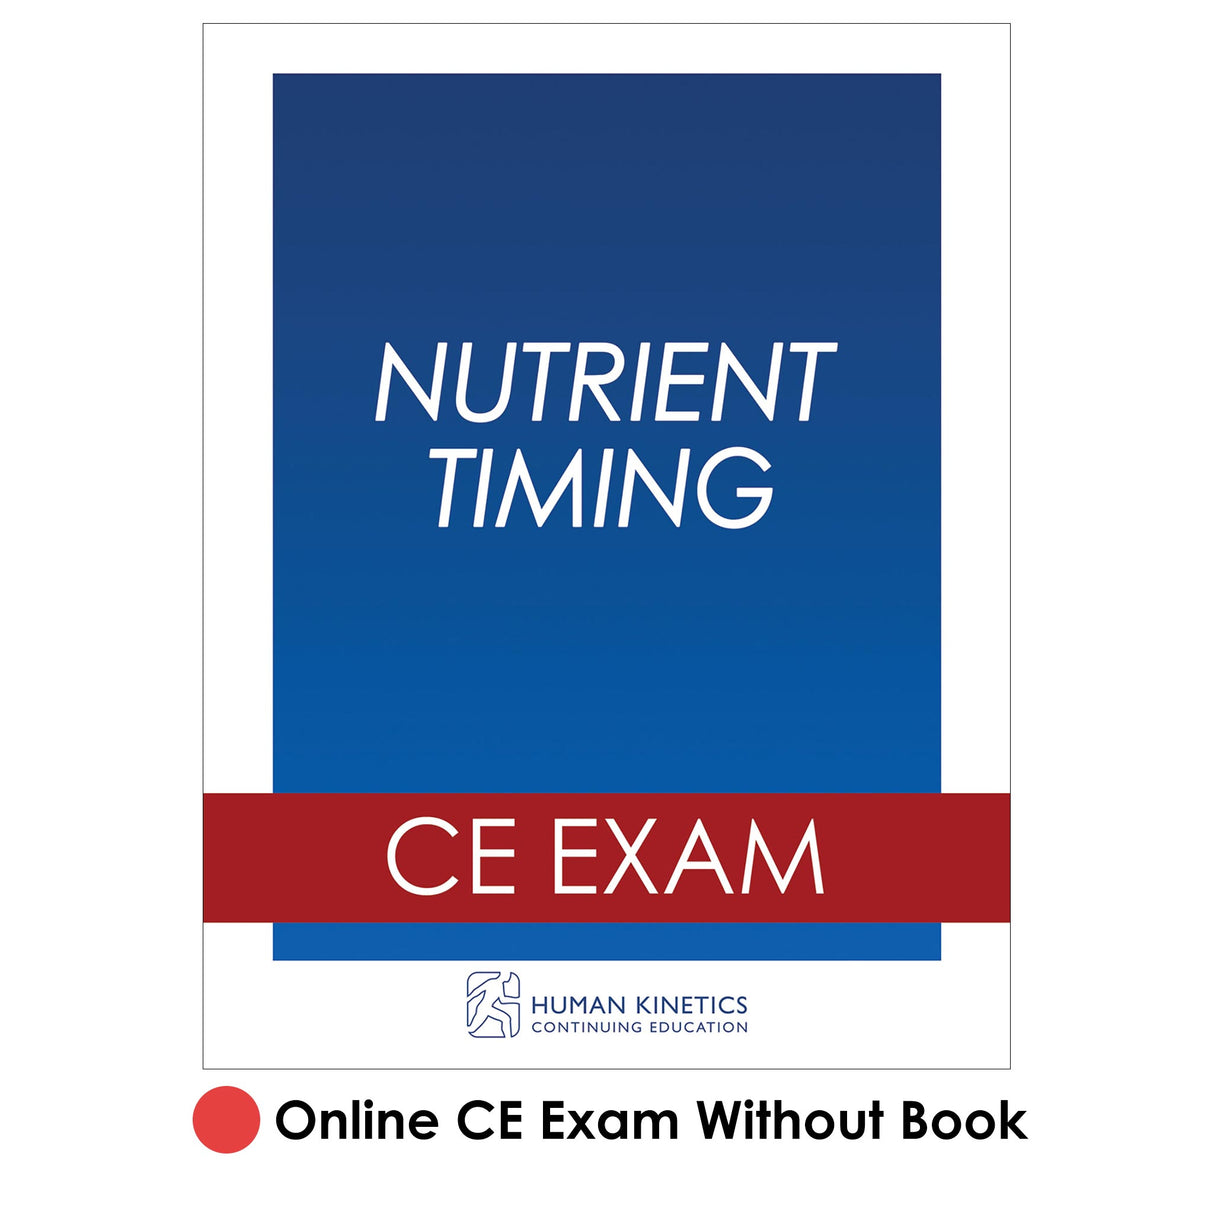 Nutrient Timing Online CE Exam Without Book